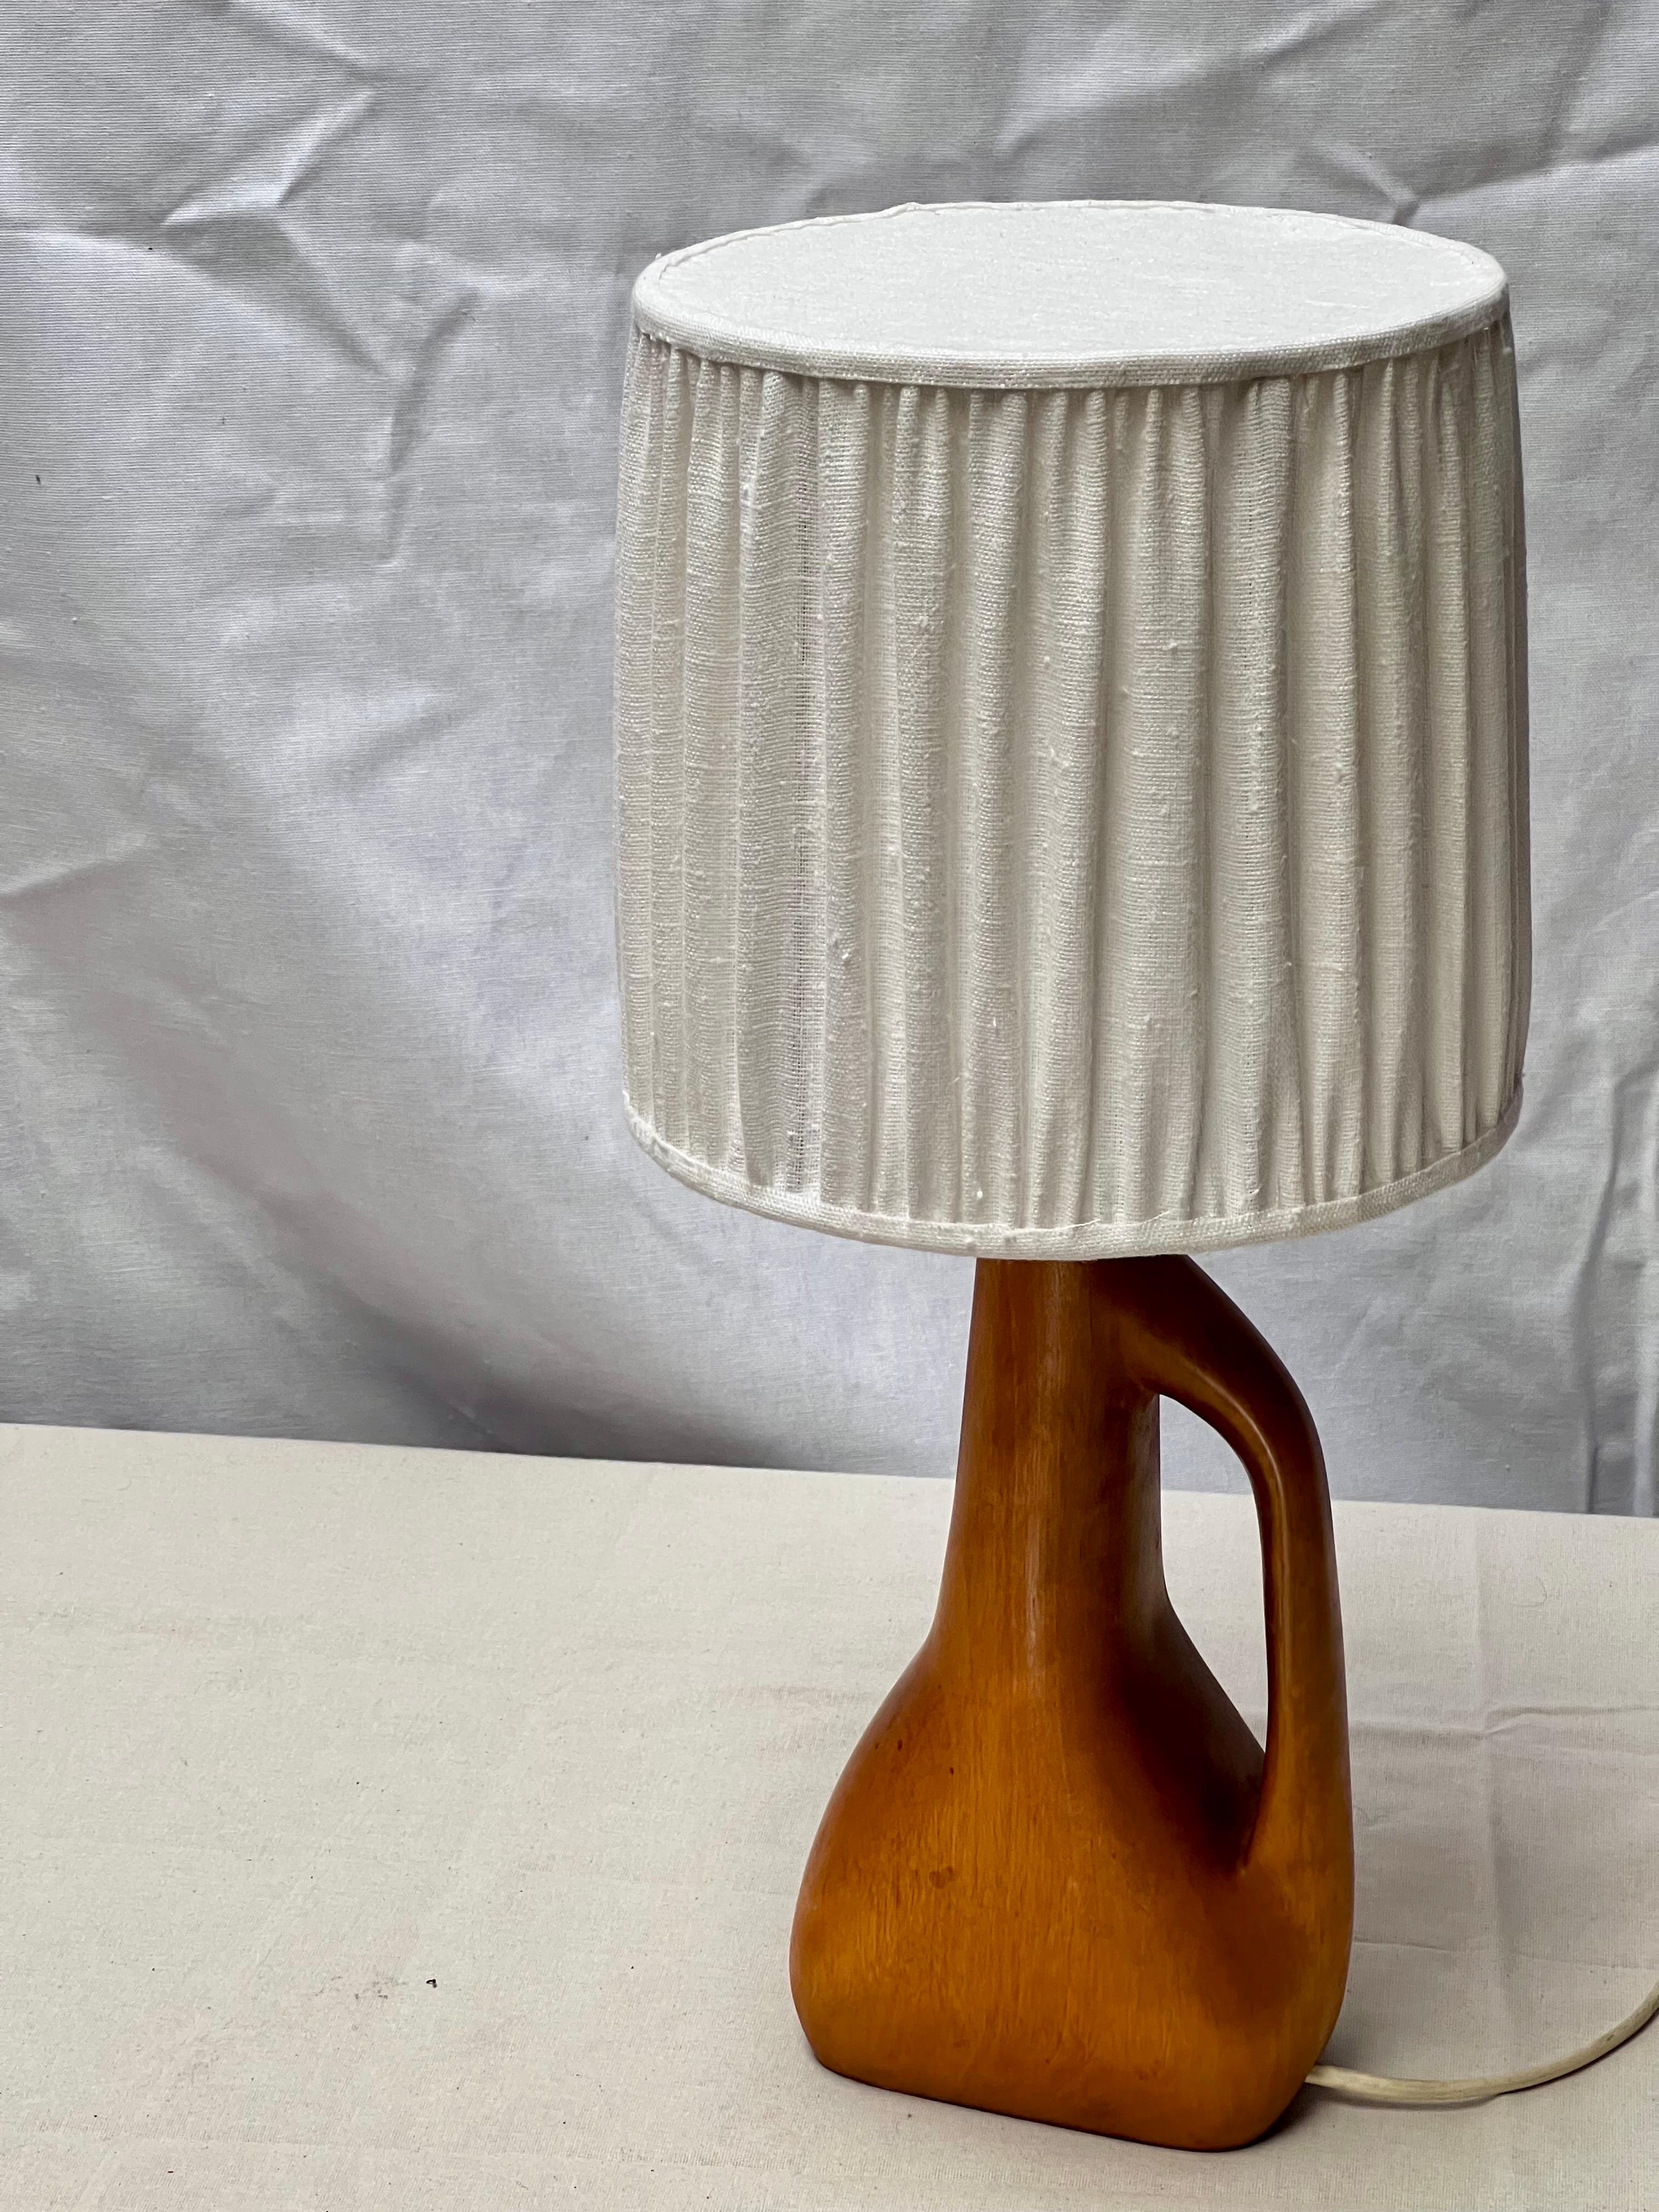 Decorative hardwood lamp made in the 1940's / 1950's in France. Made of hardwood in the sculptural shape of a jug. The total height of this lamp including the shade is 50 cm. The shade is H 23 cm and the diameter 21 cm. The bottle is 30cm excluding